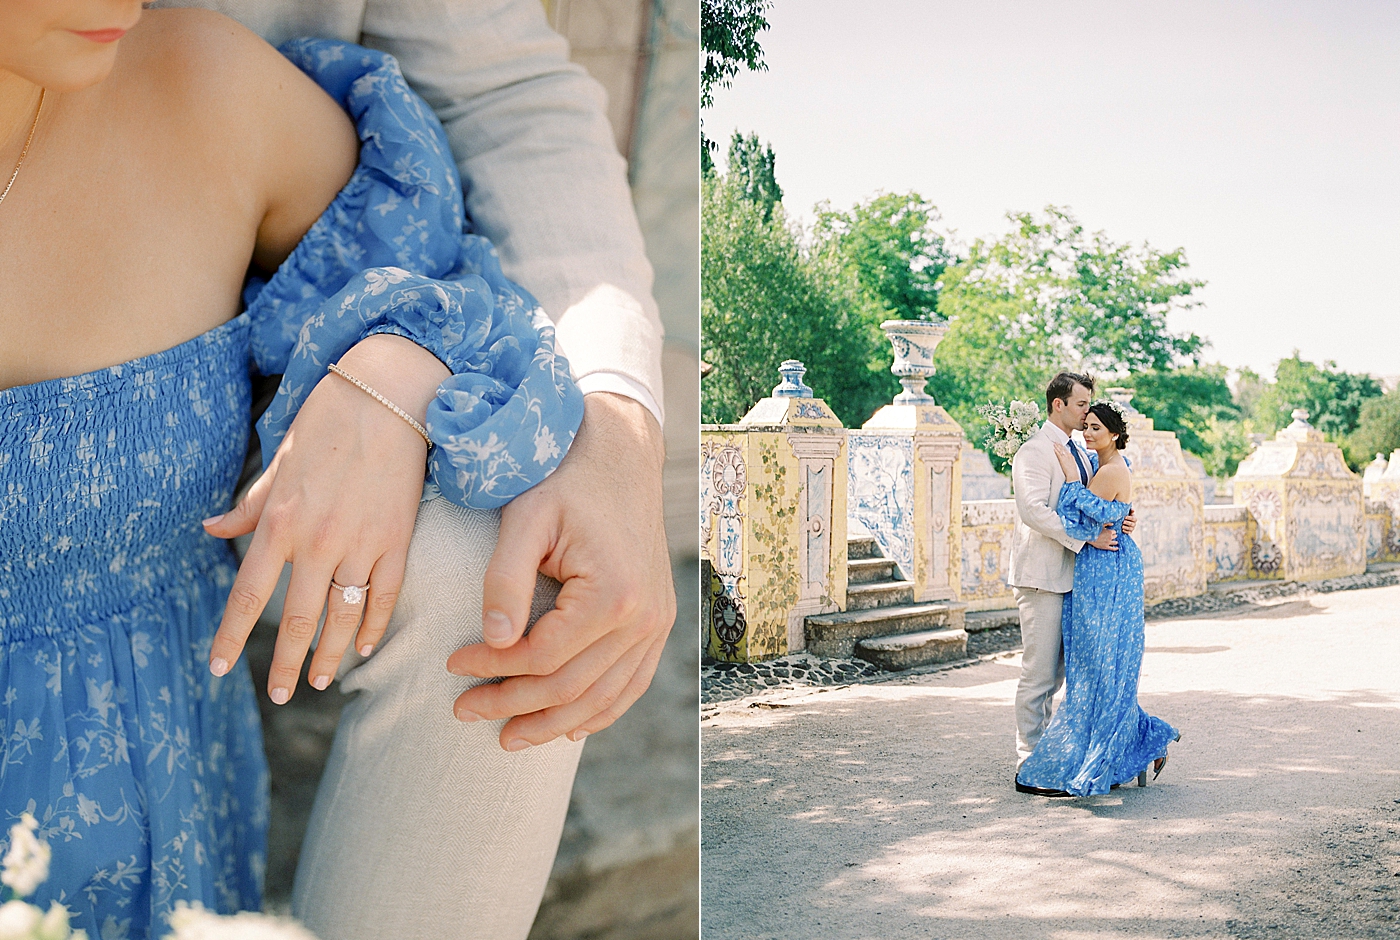 Detail of bride to be wearing engagement ring wearing a blue dress | Photo by Diane Sotero 